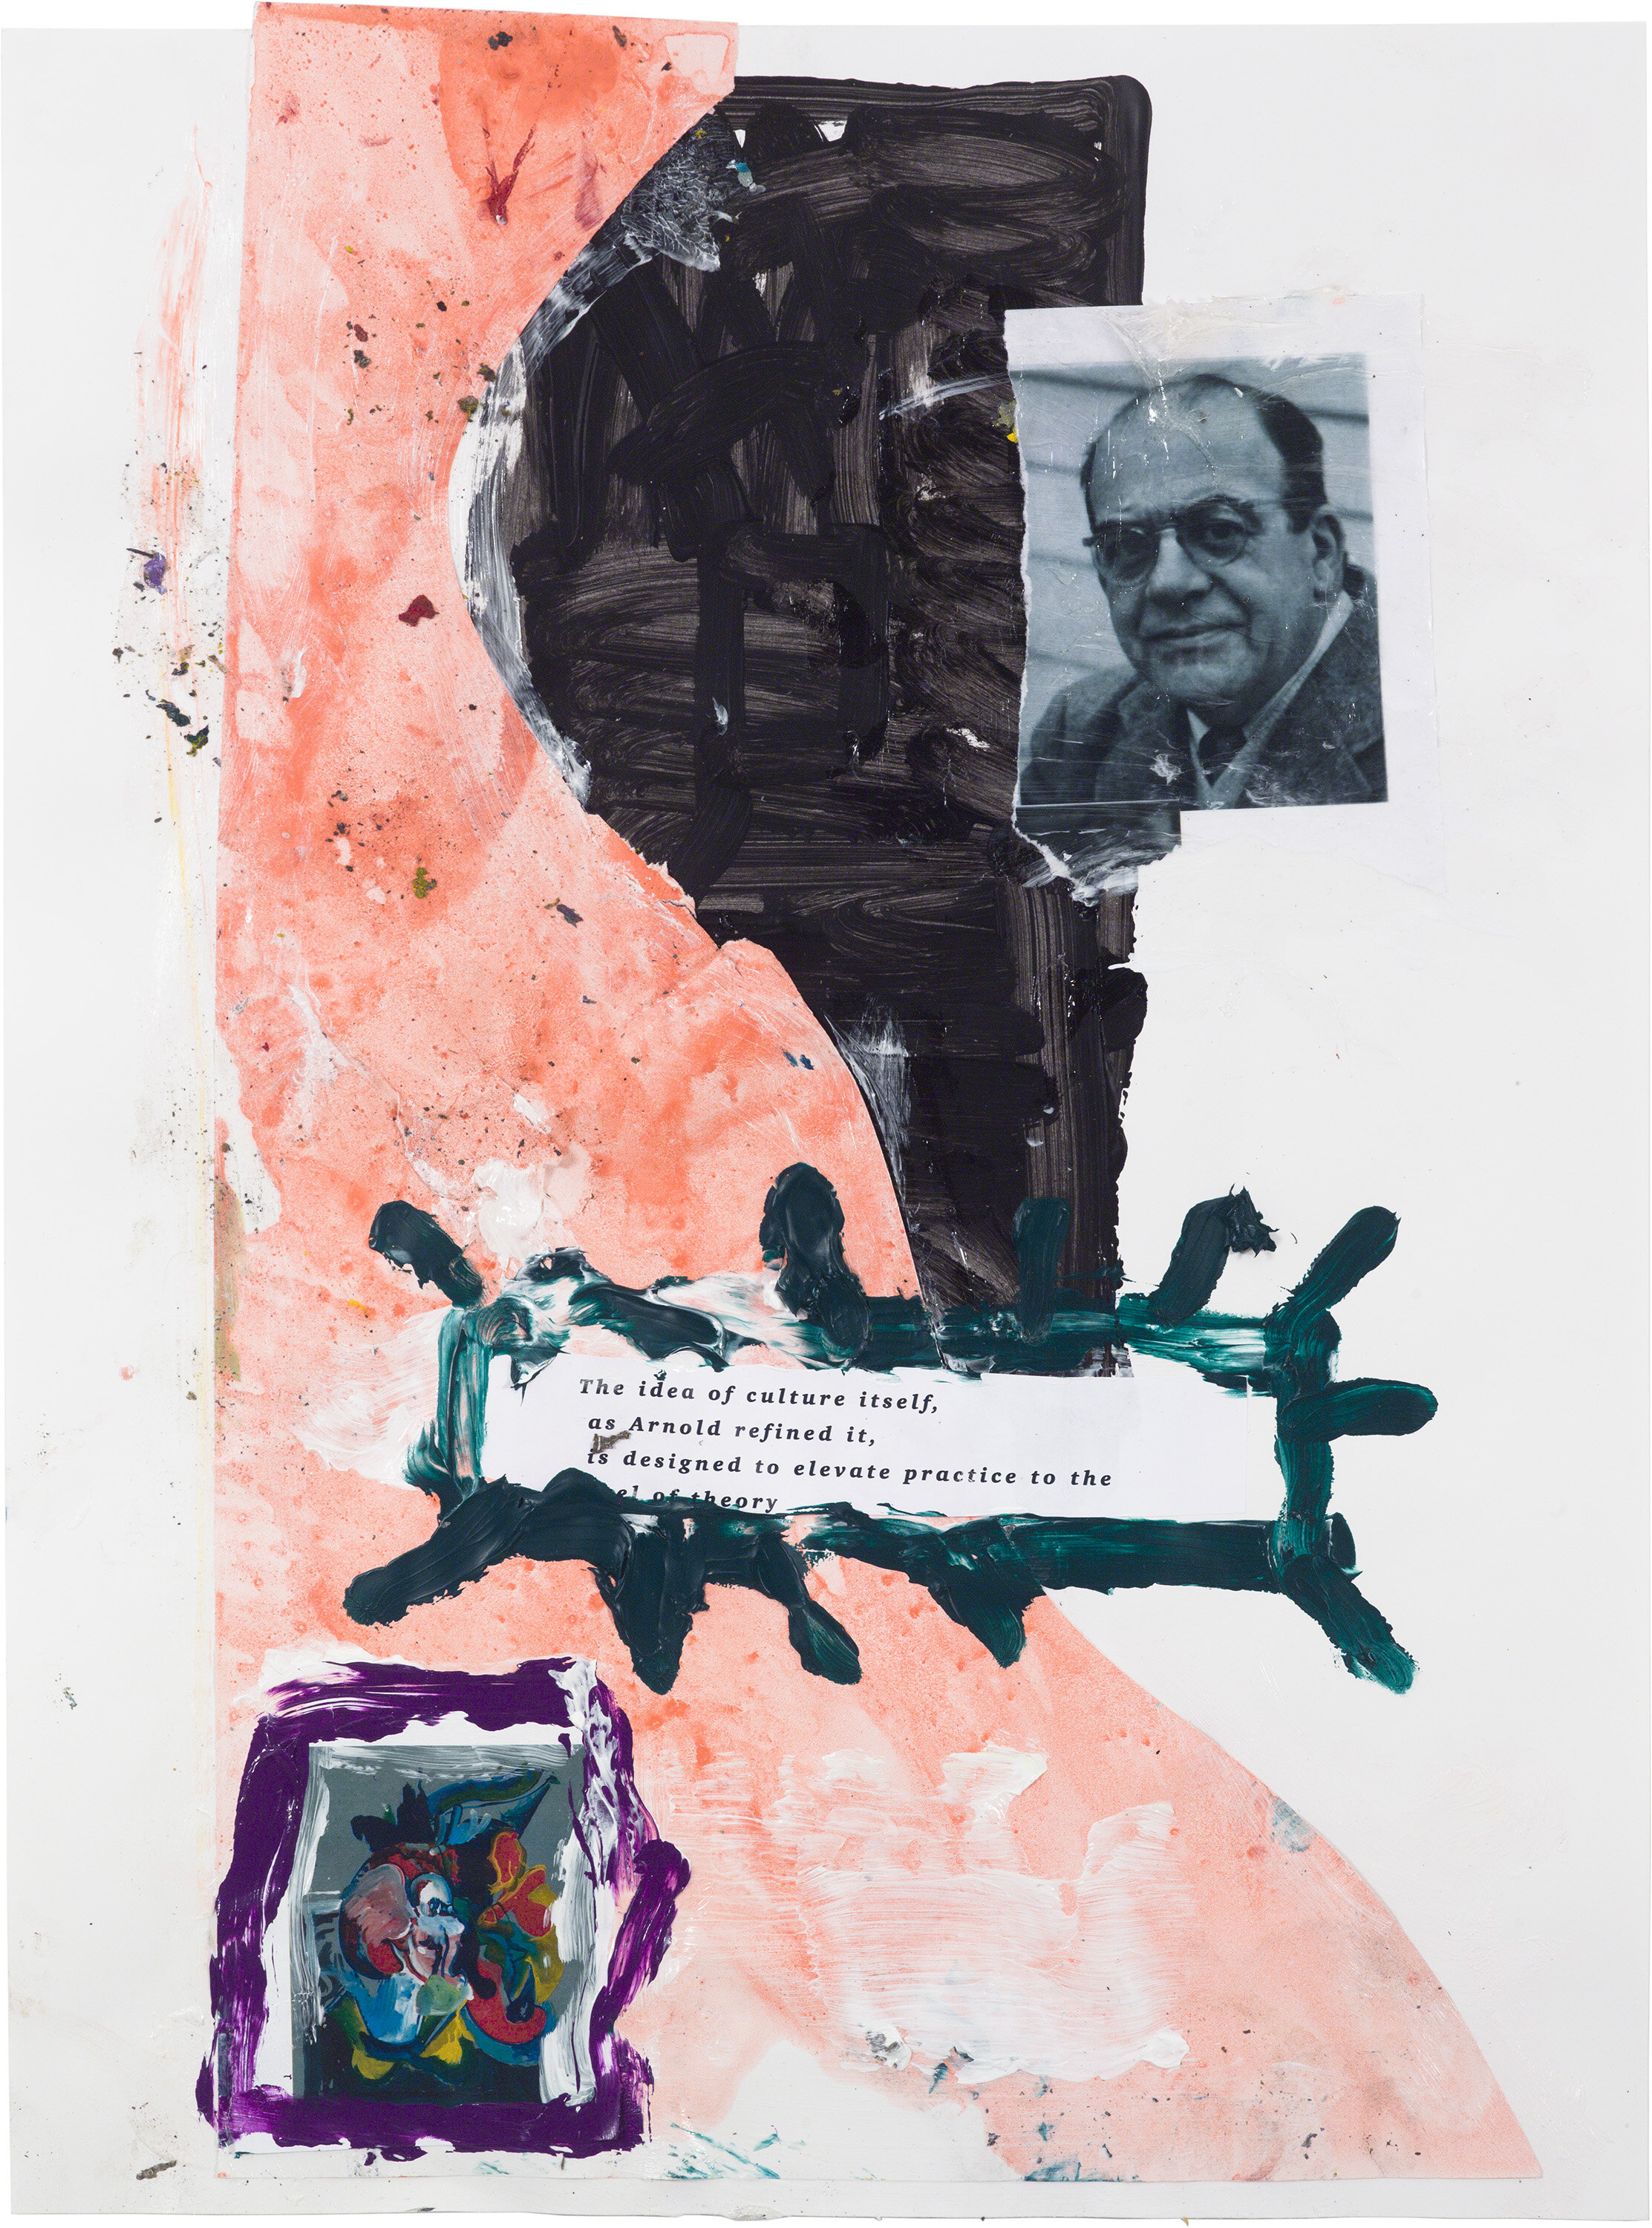  Drew Beattie and Ben Shepard   DBBS-DRW-2019-224   2019  acrylic and collage on paper  24 x 18 inches 